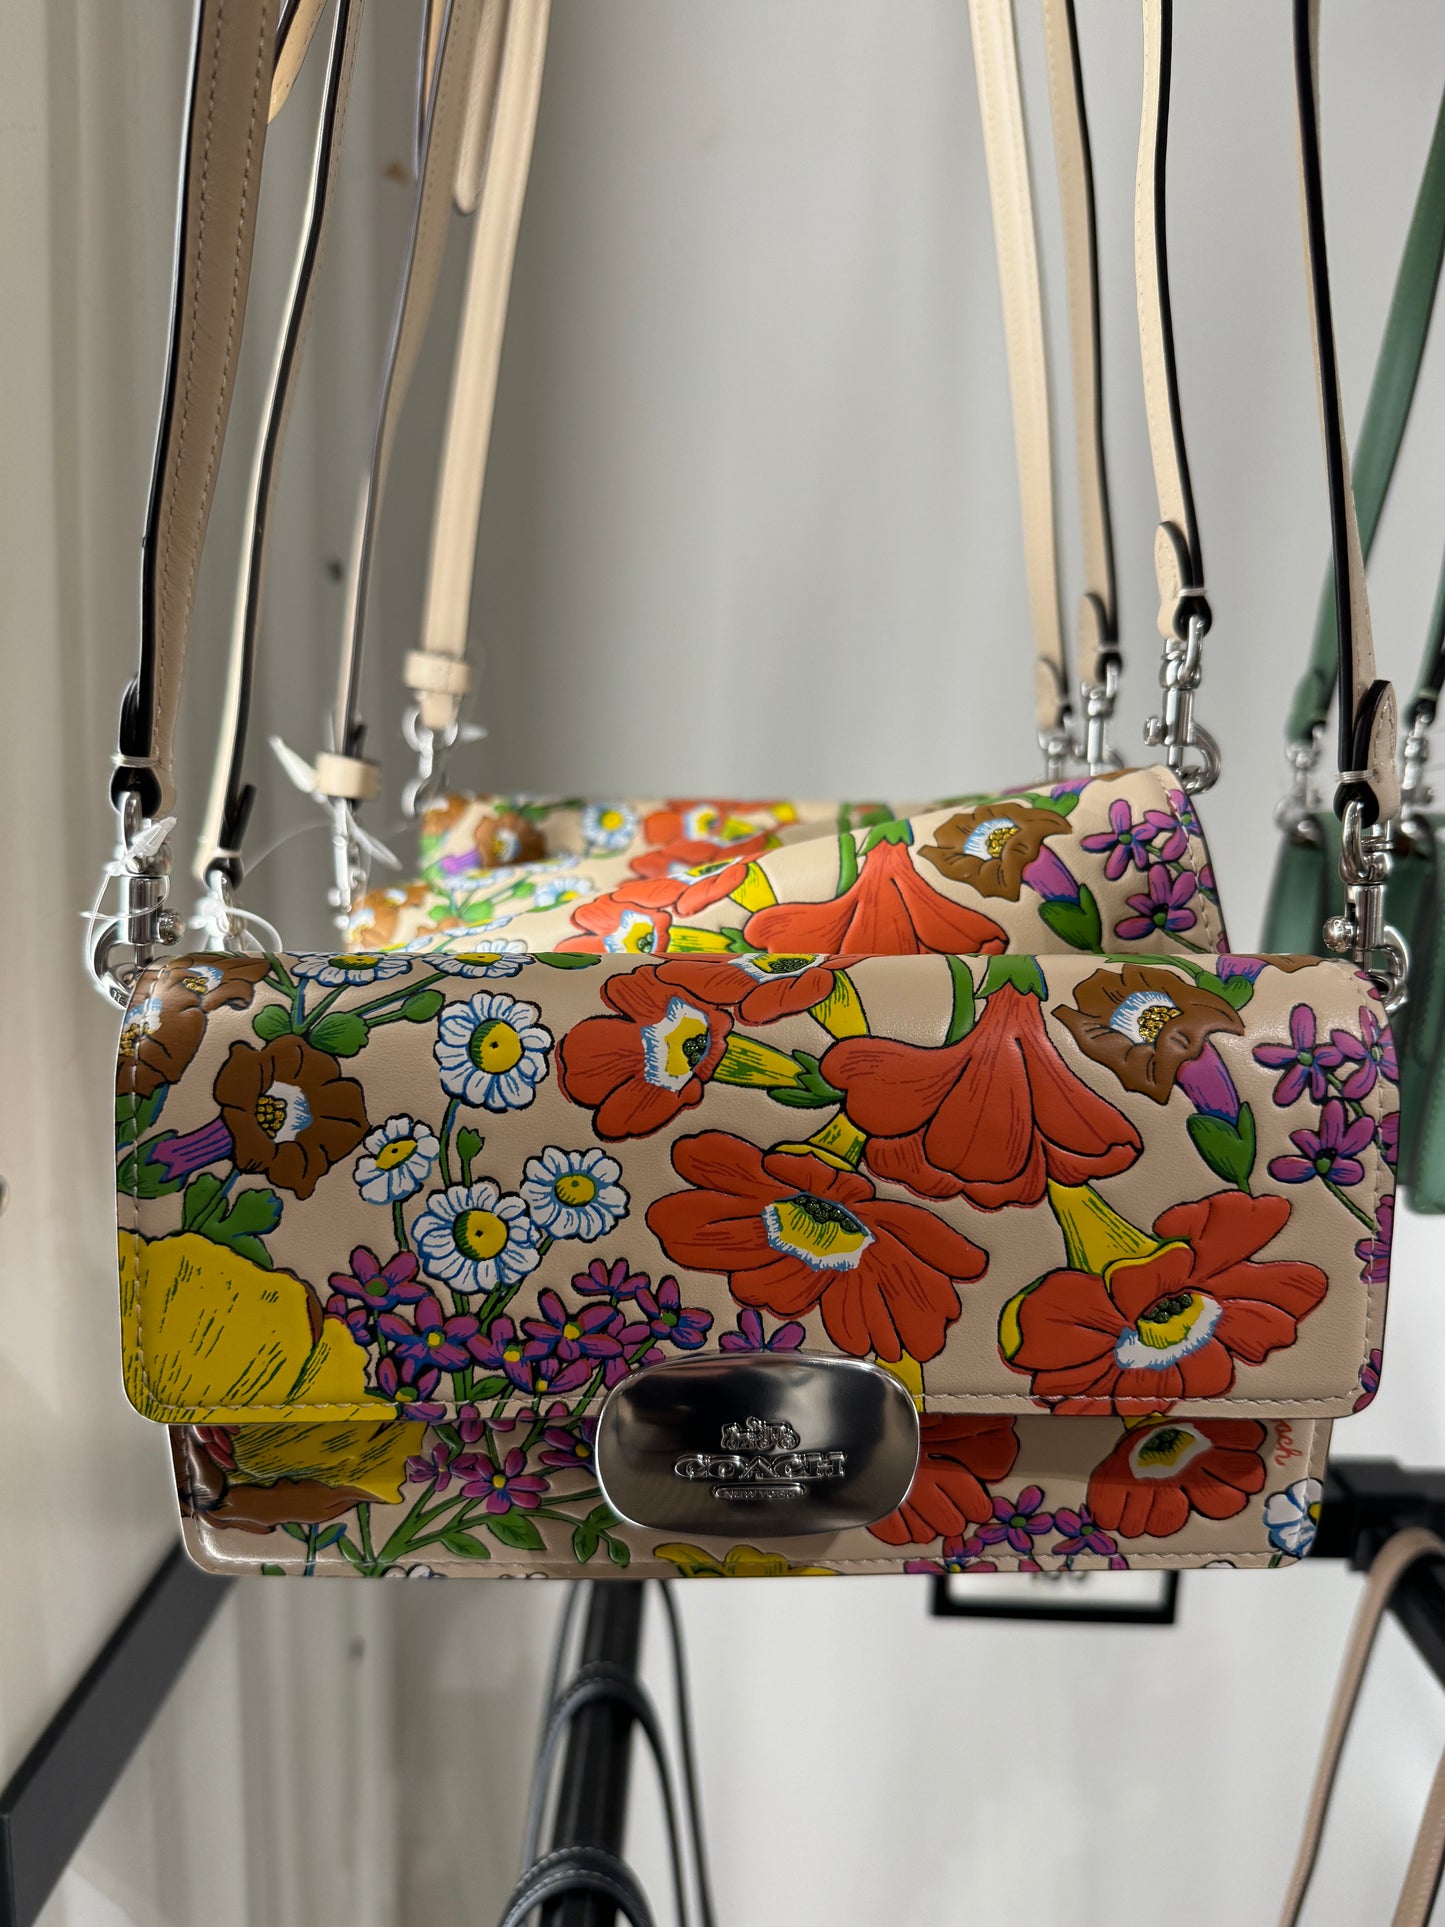 Coach Eliza Small Flap Crossbody With Floral Print Ivory Multi (Pre-Order)